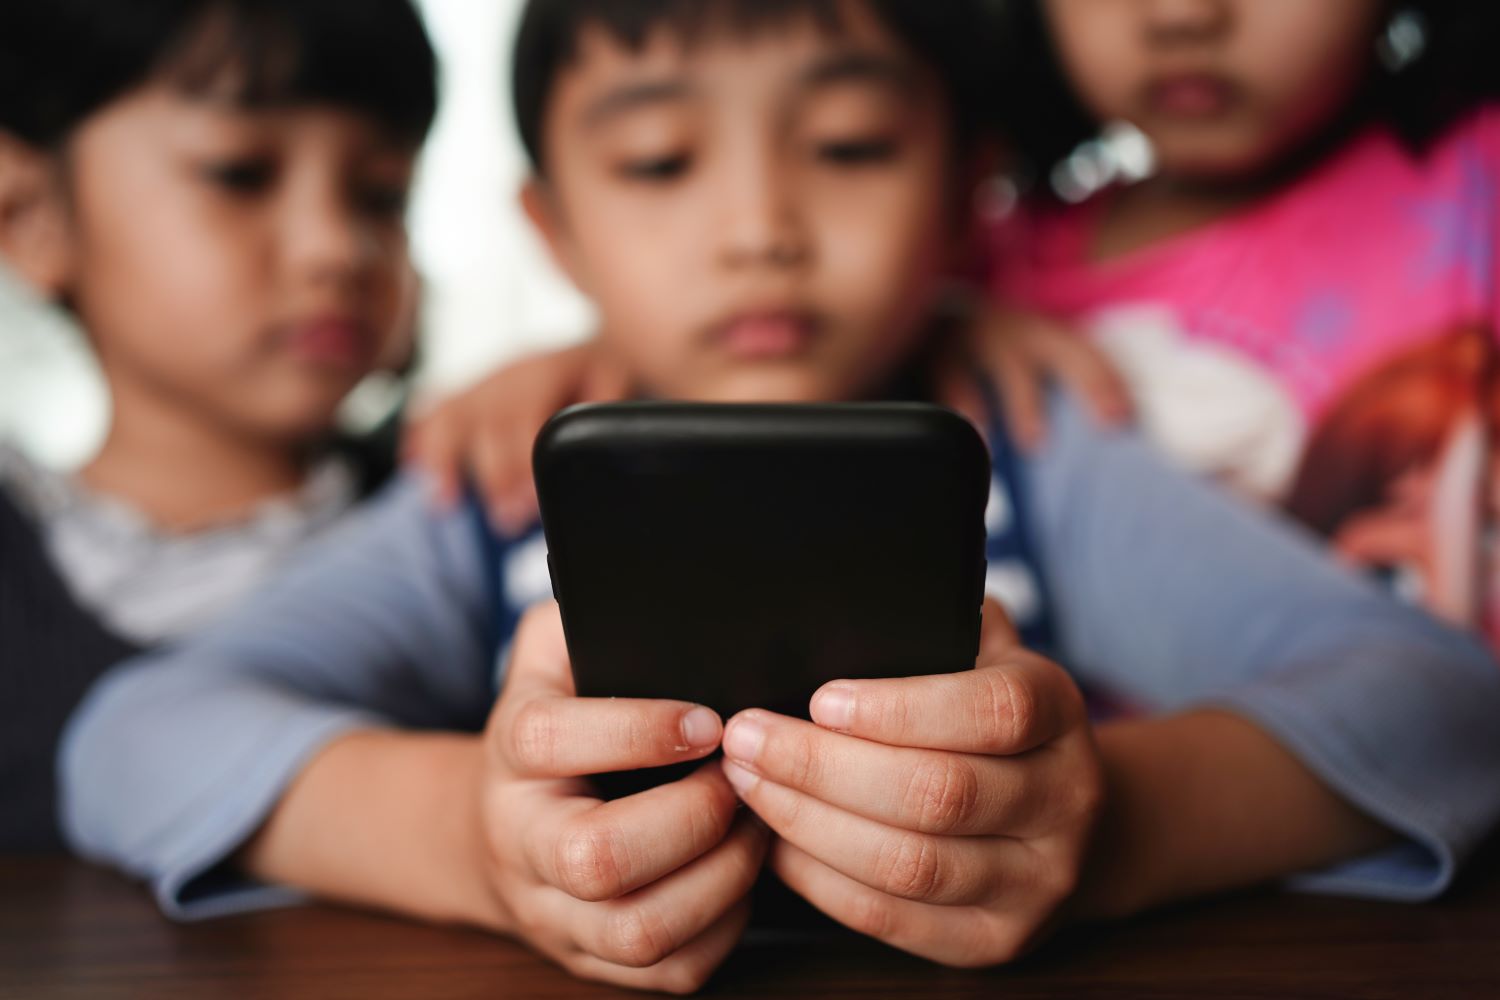 Children looking at a smartphone